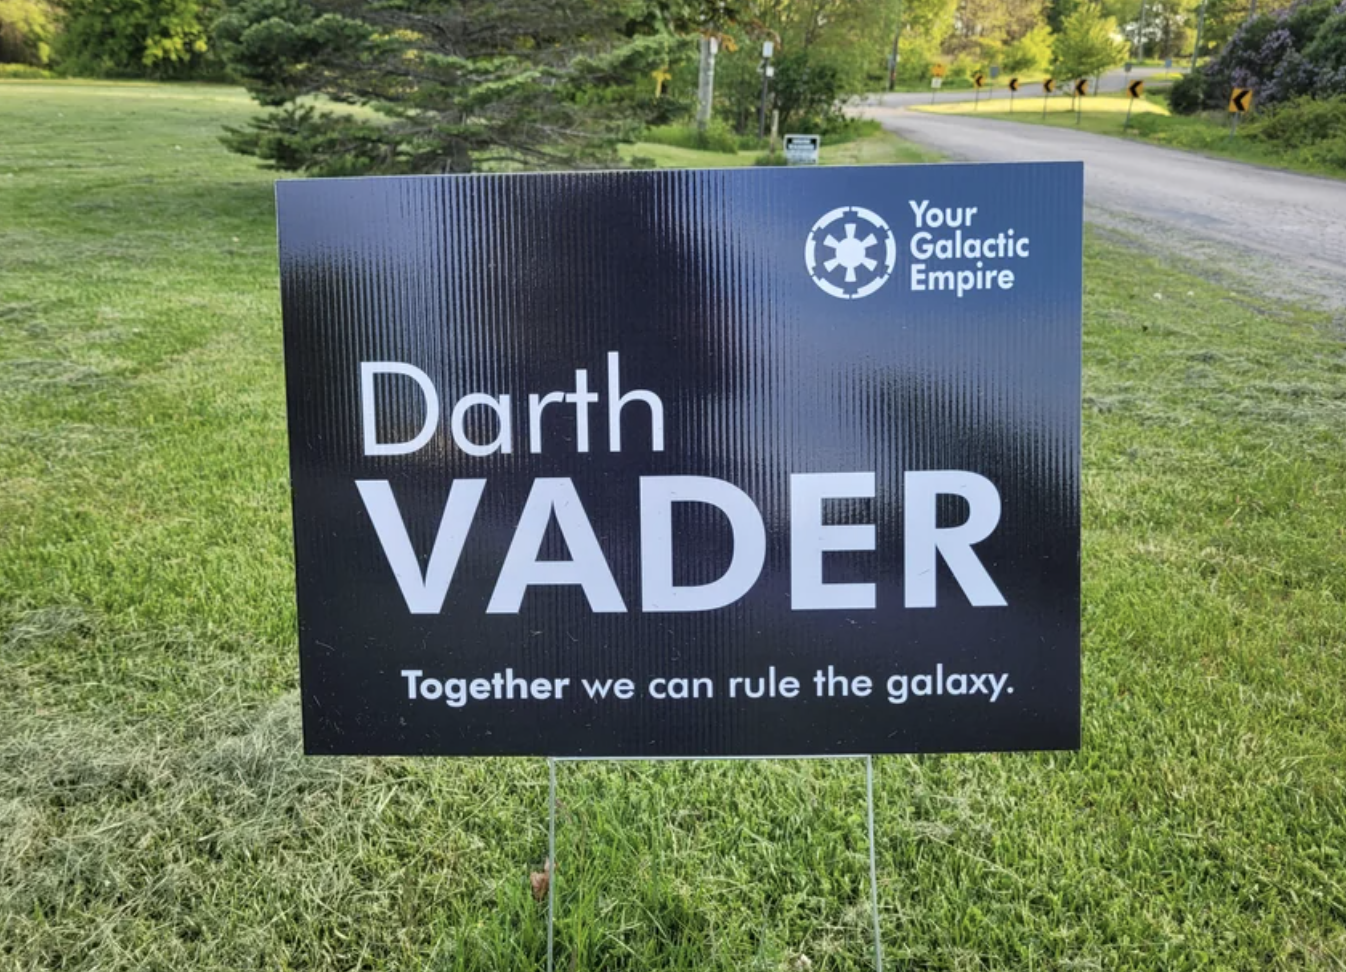 Sign with &quot;Darth Vader - Together we can rule the galaxy&quot; alongside the logo &quot;Your Galactic Empire&quot; on grass